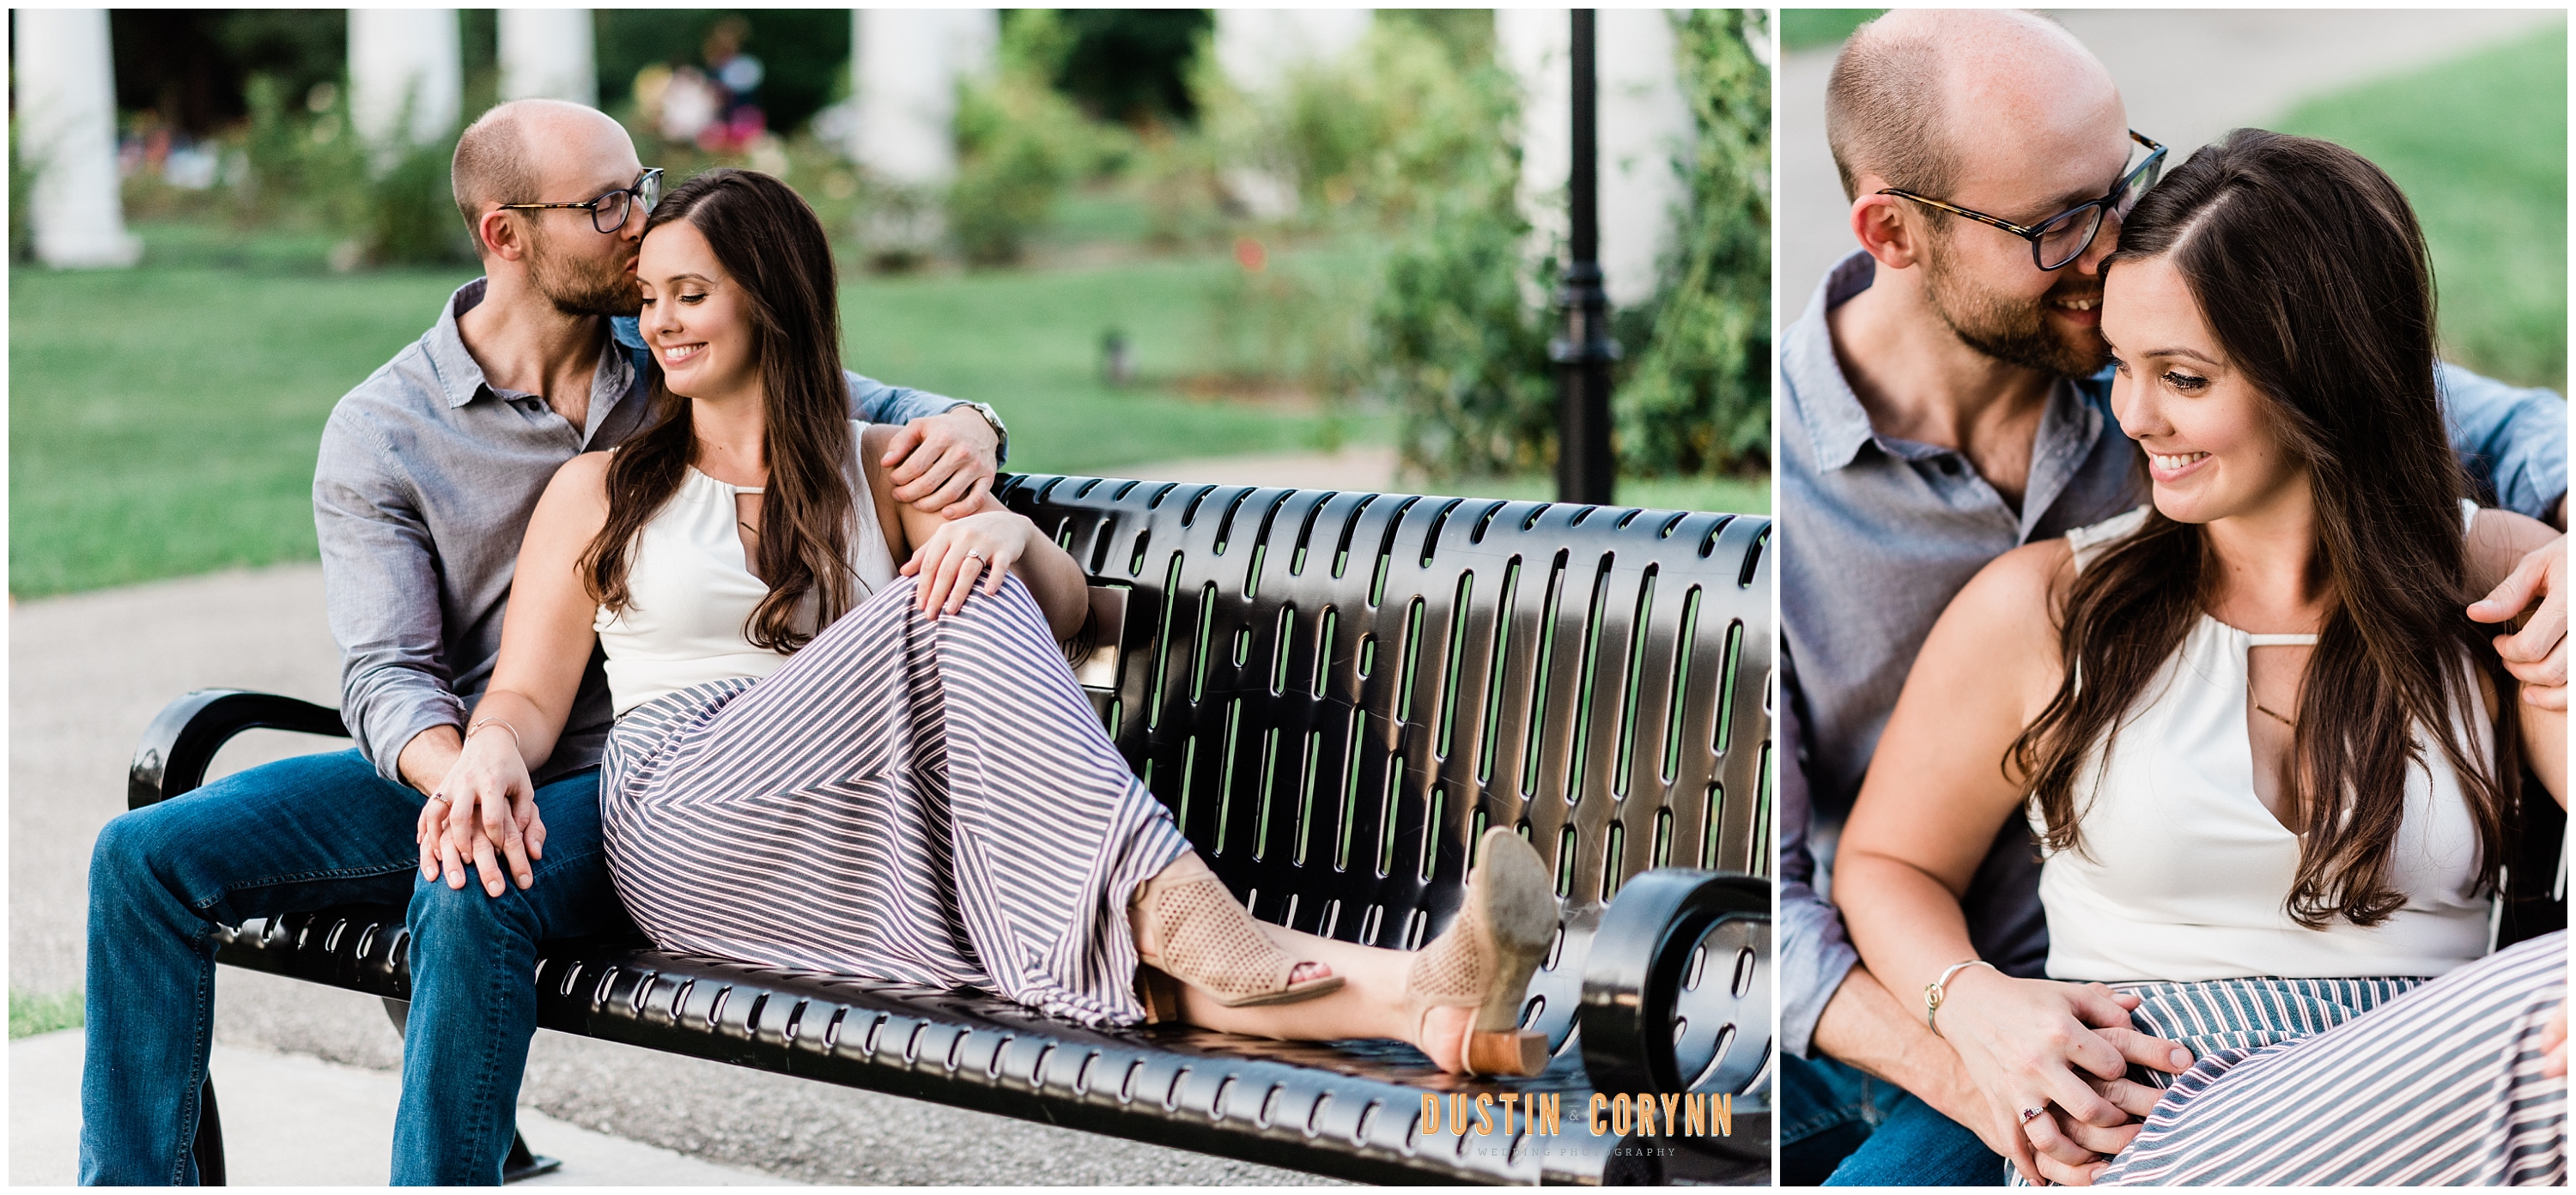 Couple at Lakeside Rose Gardens Engagement Session